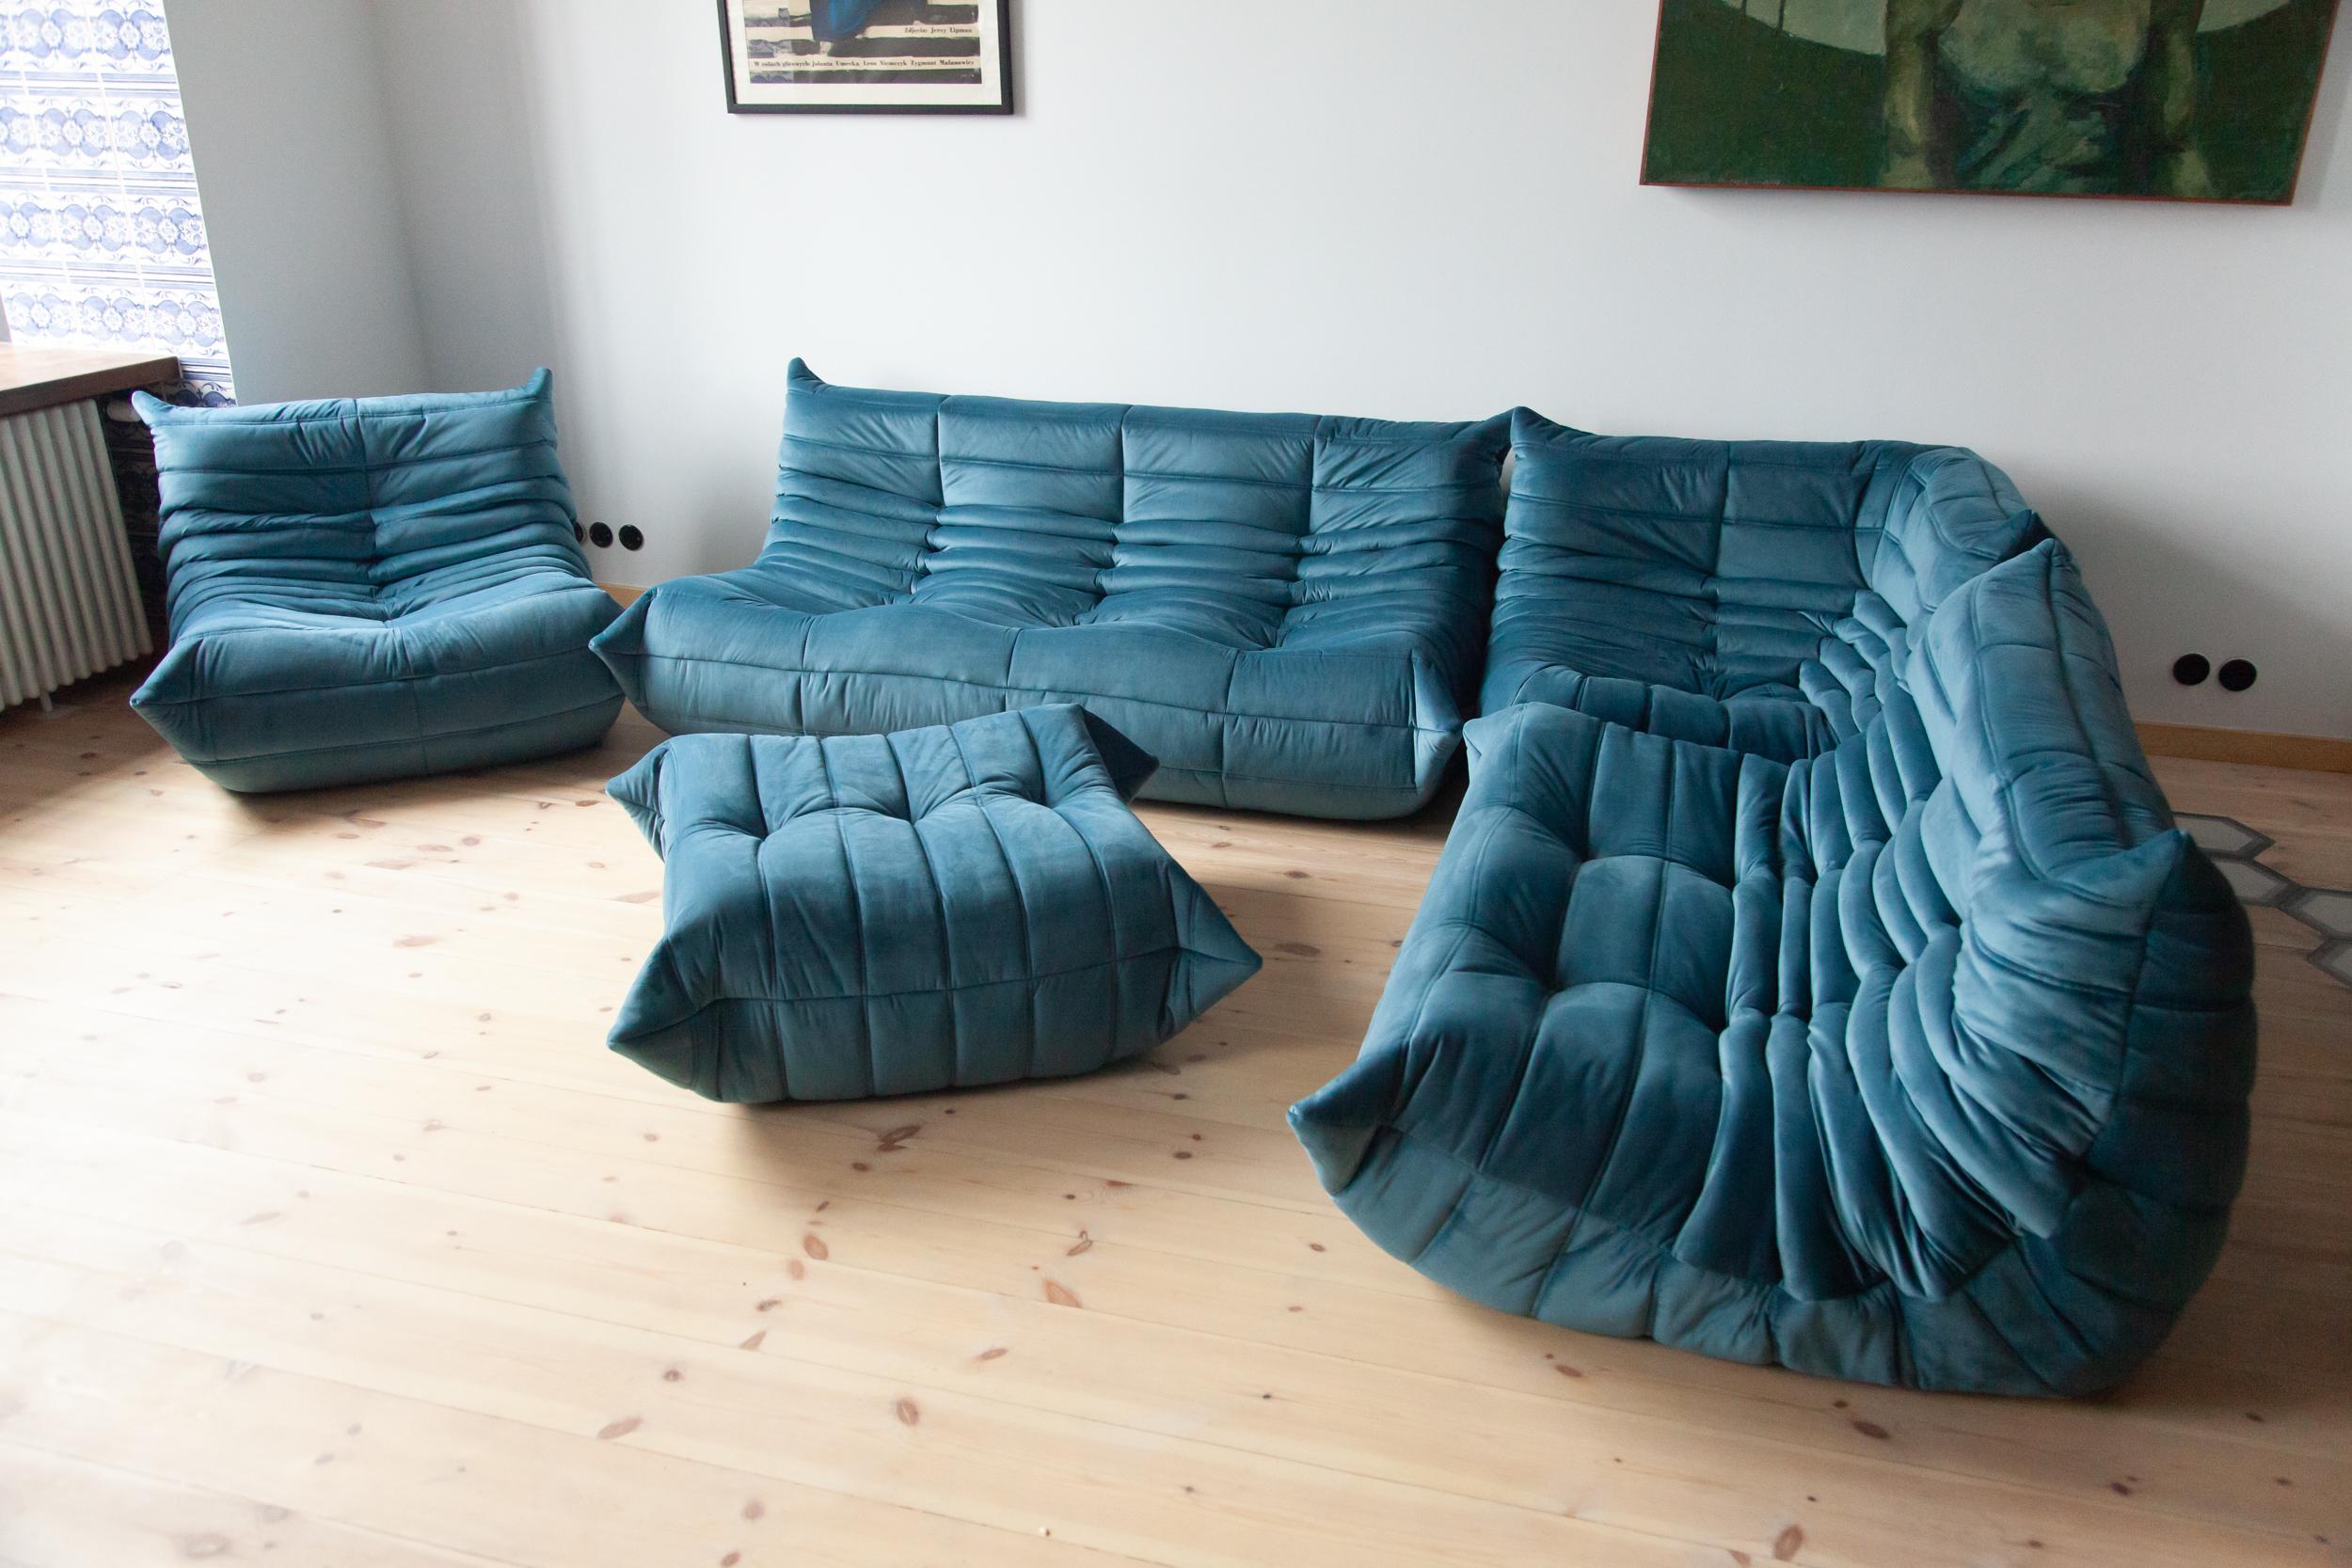 This Togo living room set was designed by Michel Ducaroy in 1973 and was manufactured by Ligne Roset in France. It has been reupholstered in new, great quality sea blue velvet and is made up of the following pieces: One three-seat couch (70 x 174 x